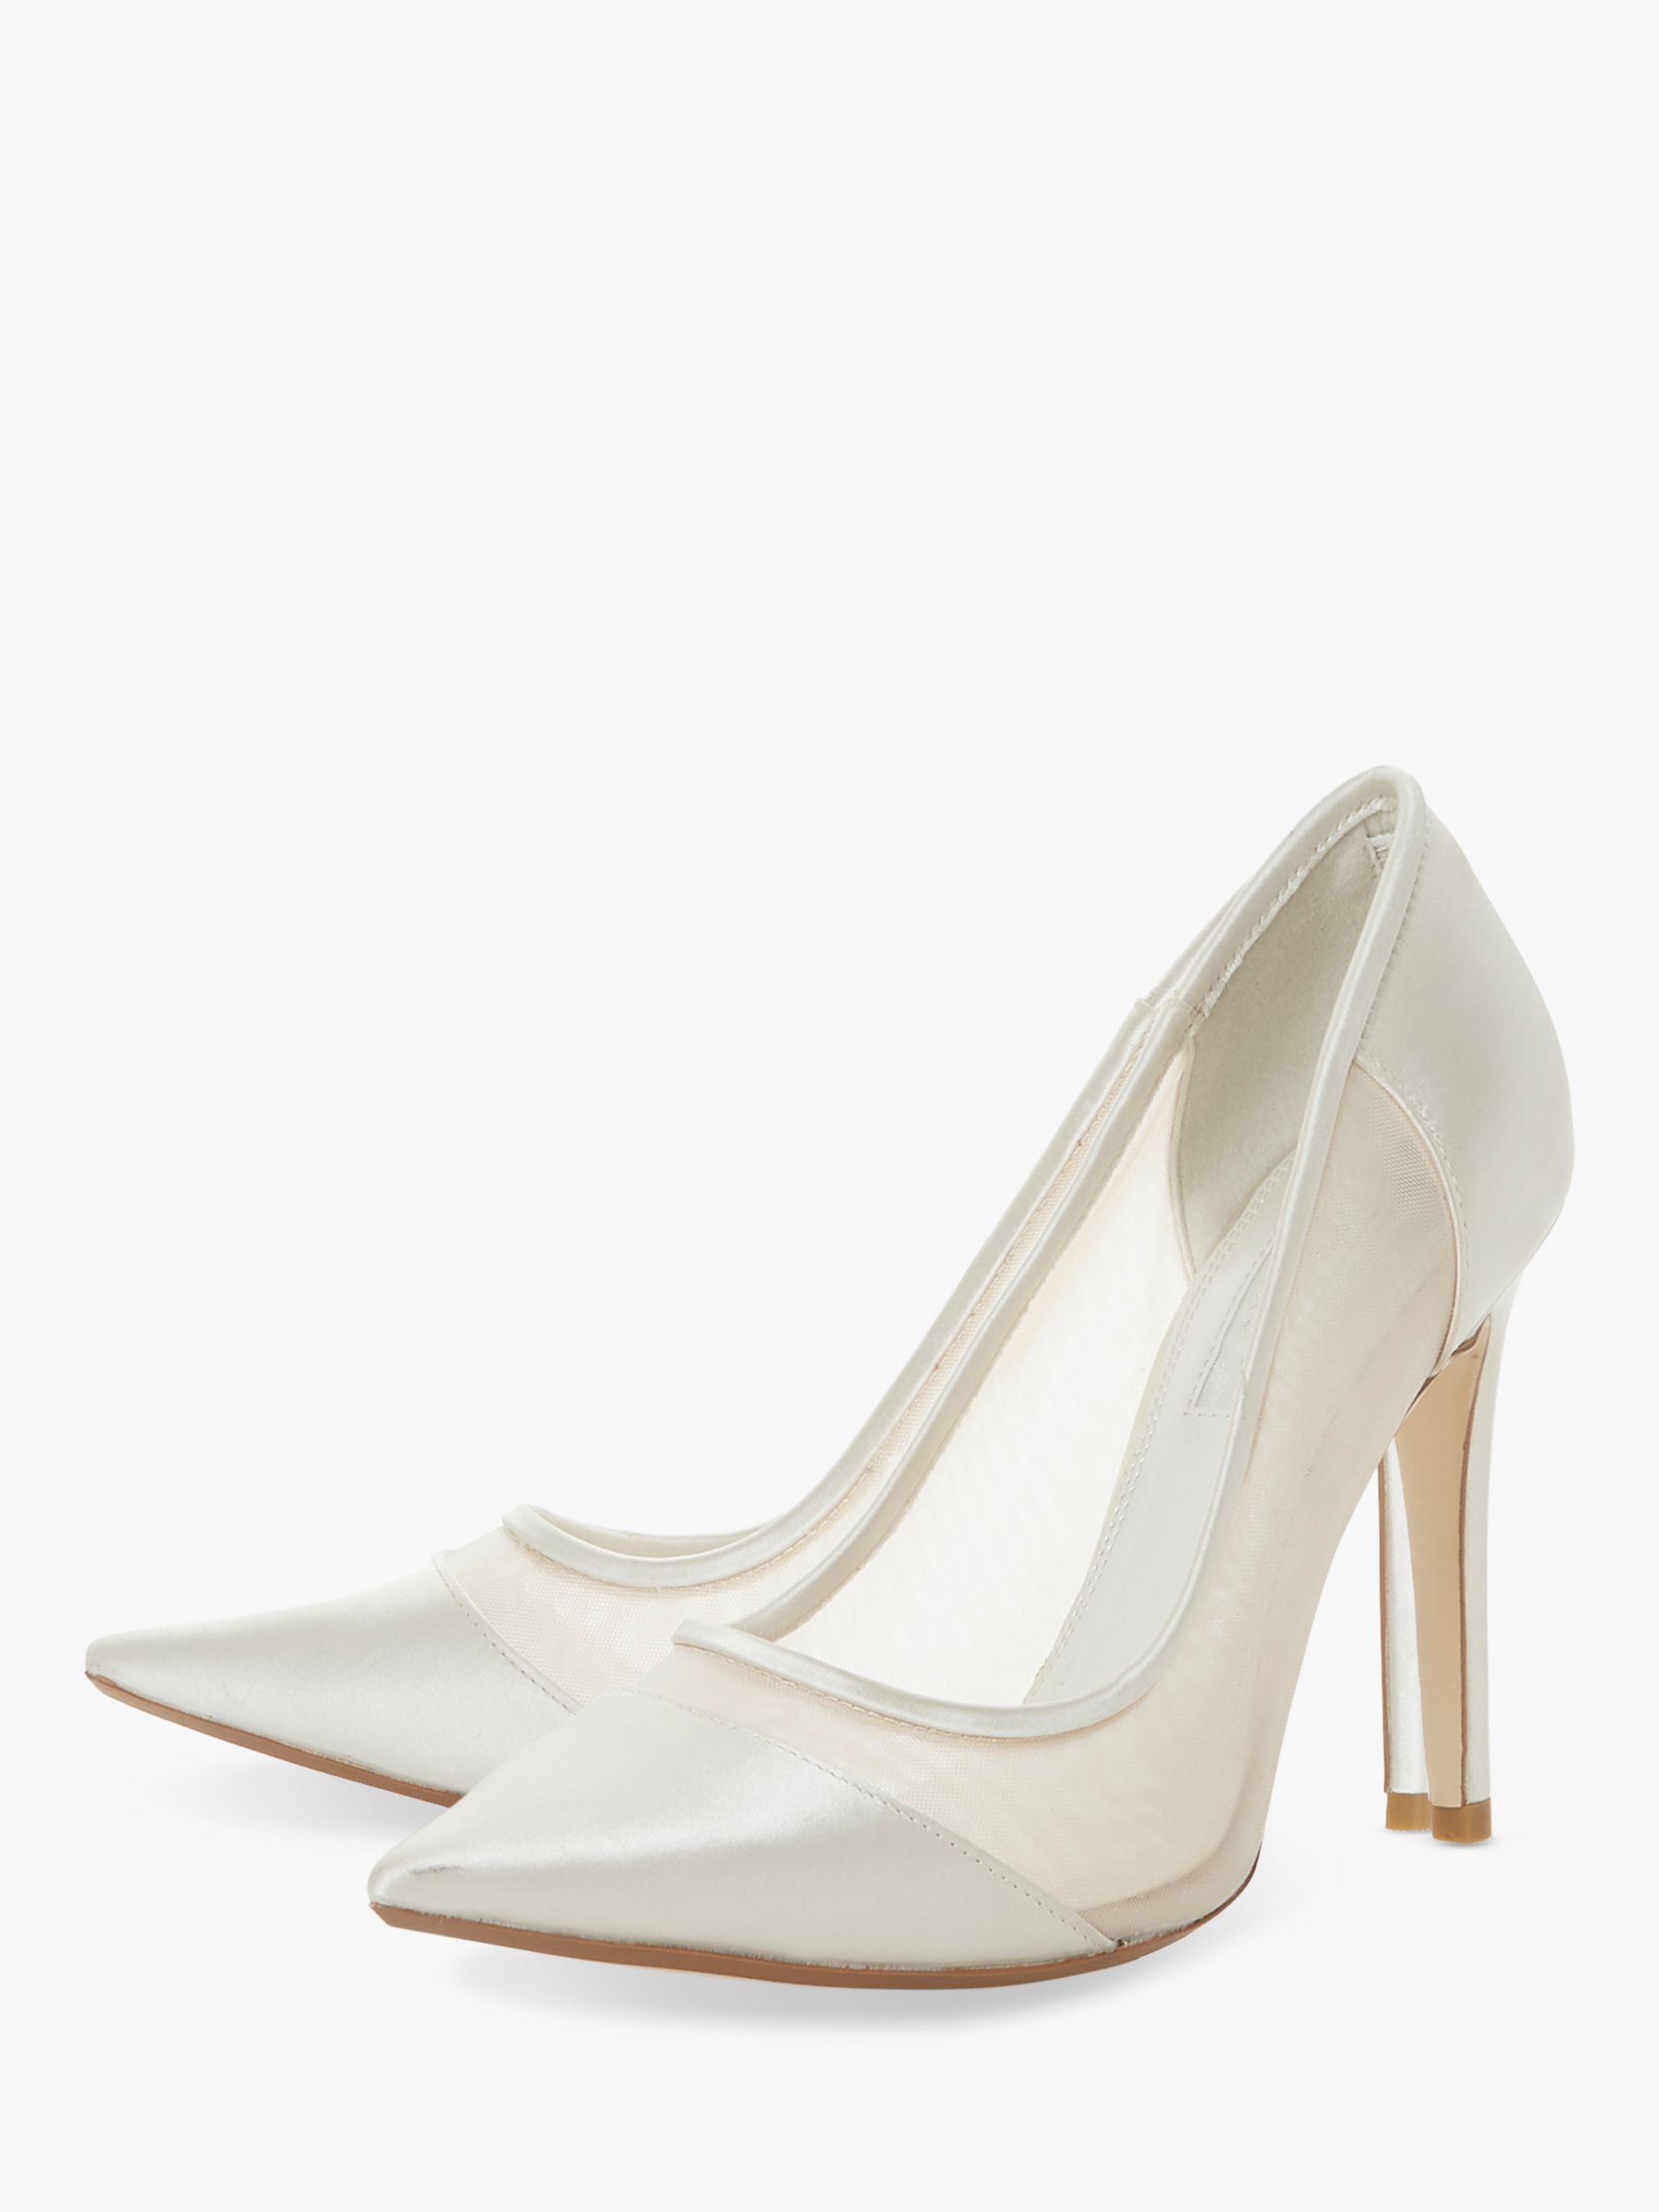 Dune Bridal Collection Bride to Be Mesh Panel Court Shoes, Ivory Satin